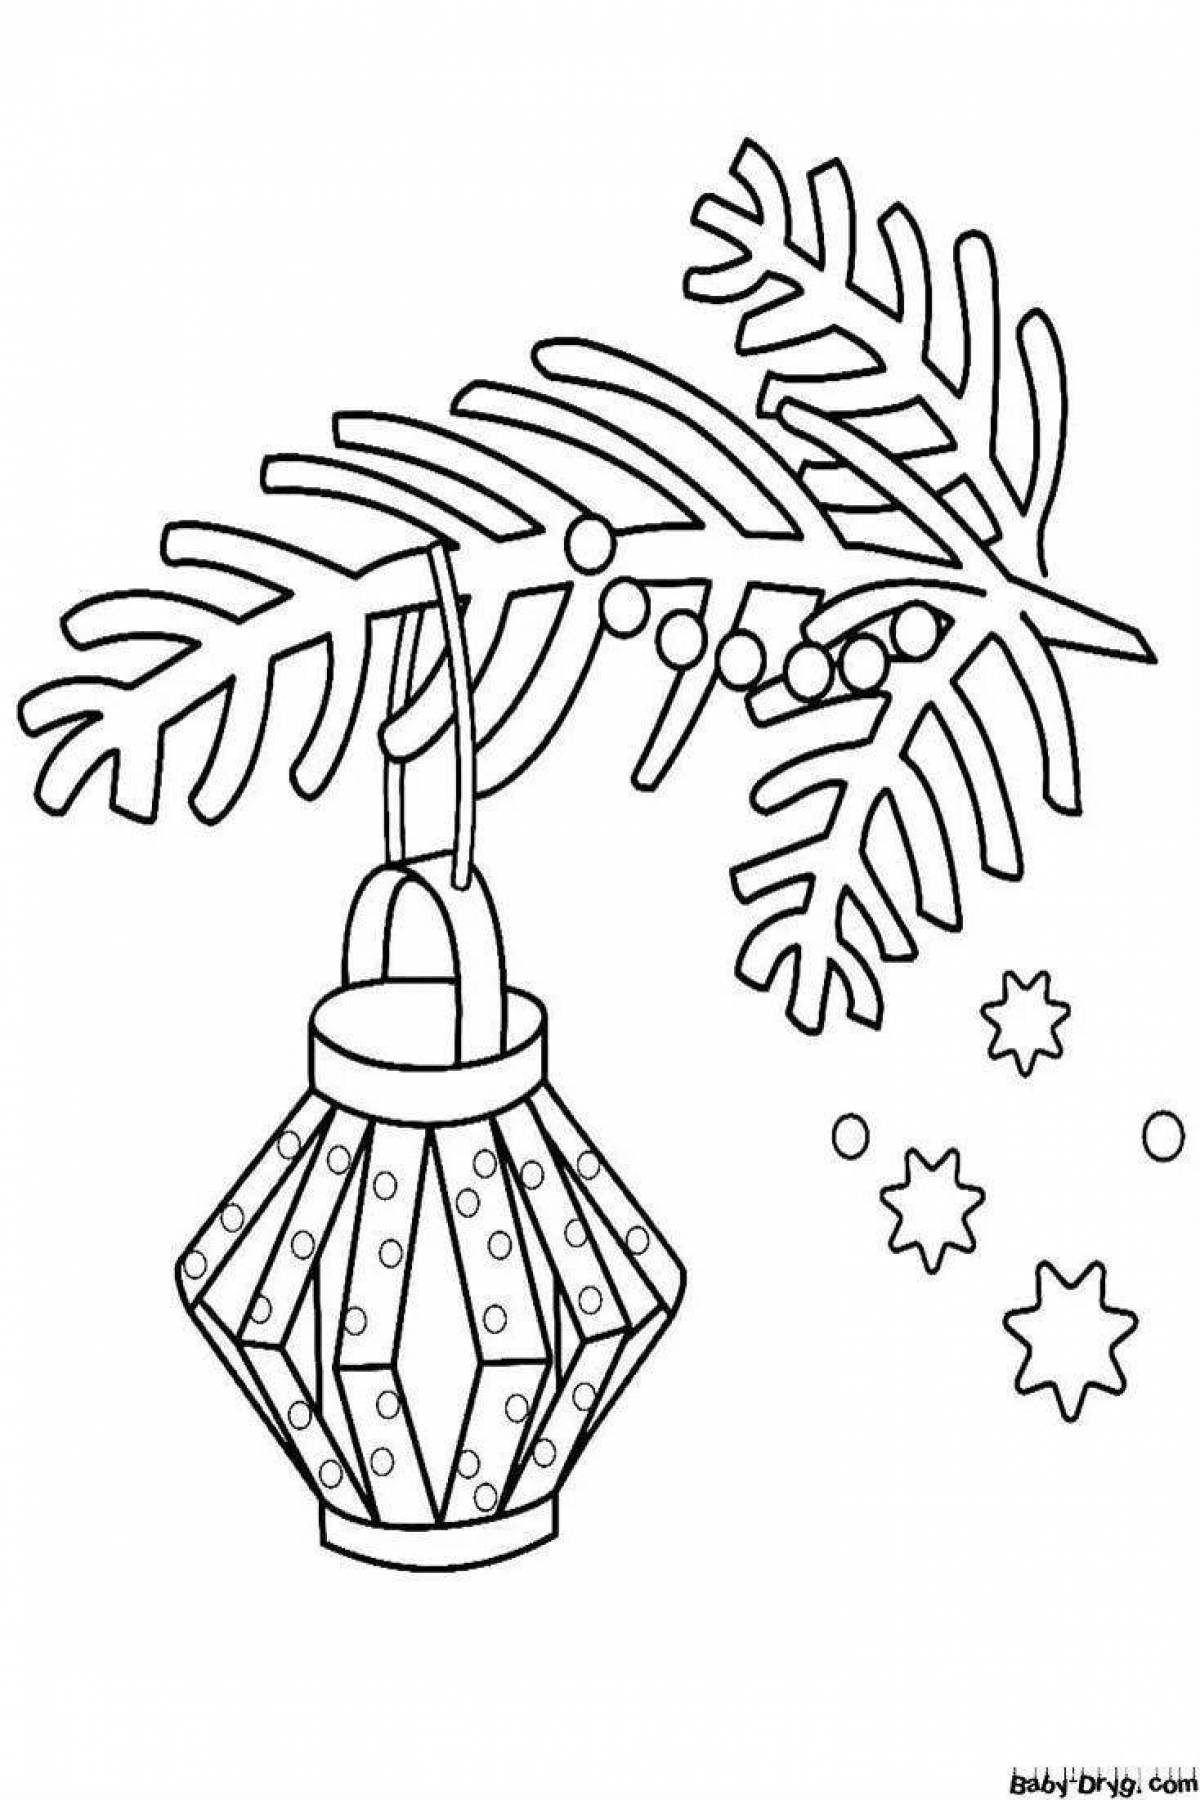 Outstanding fir branch coloring page for kids